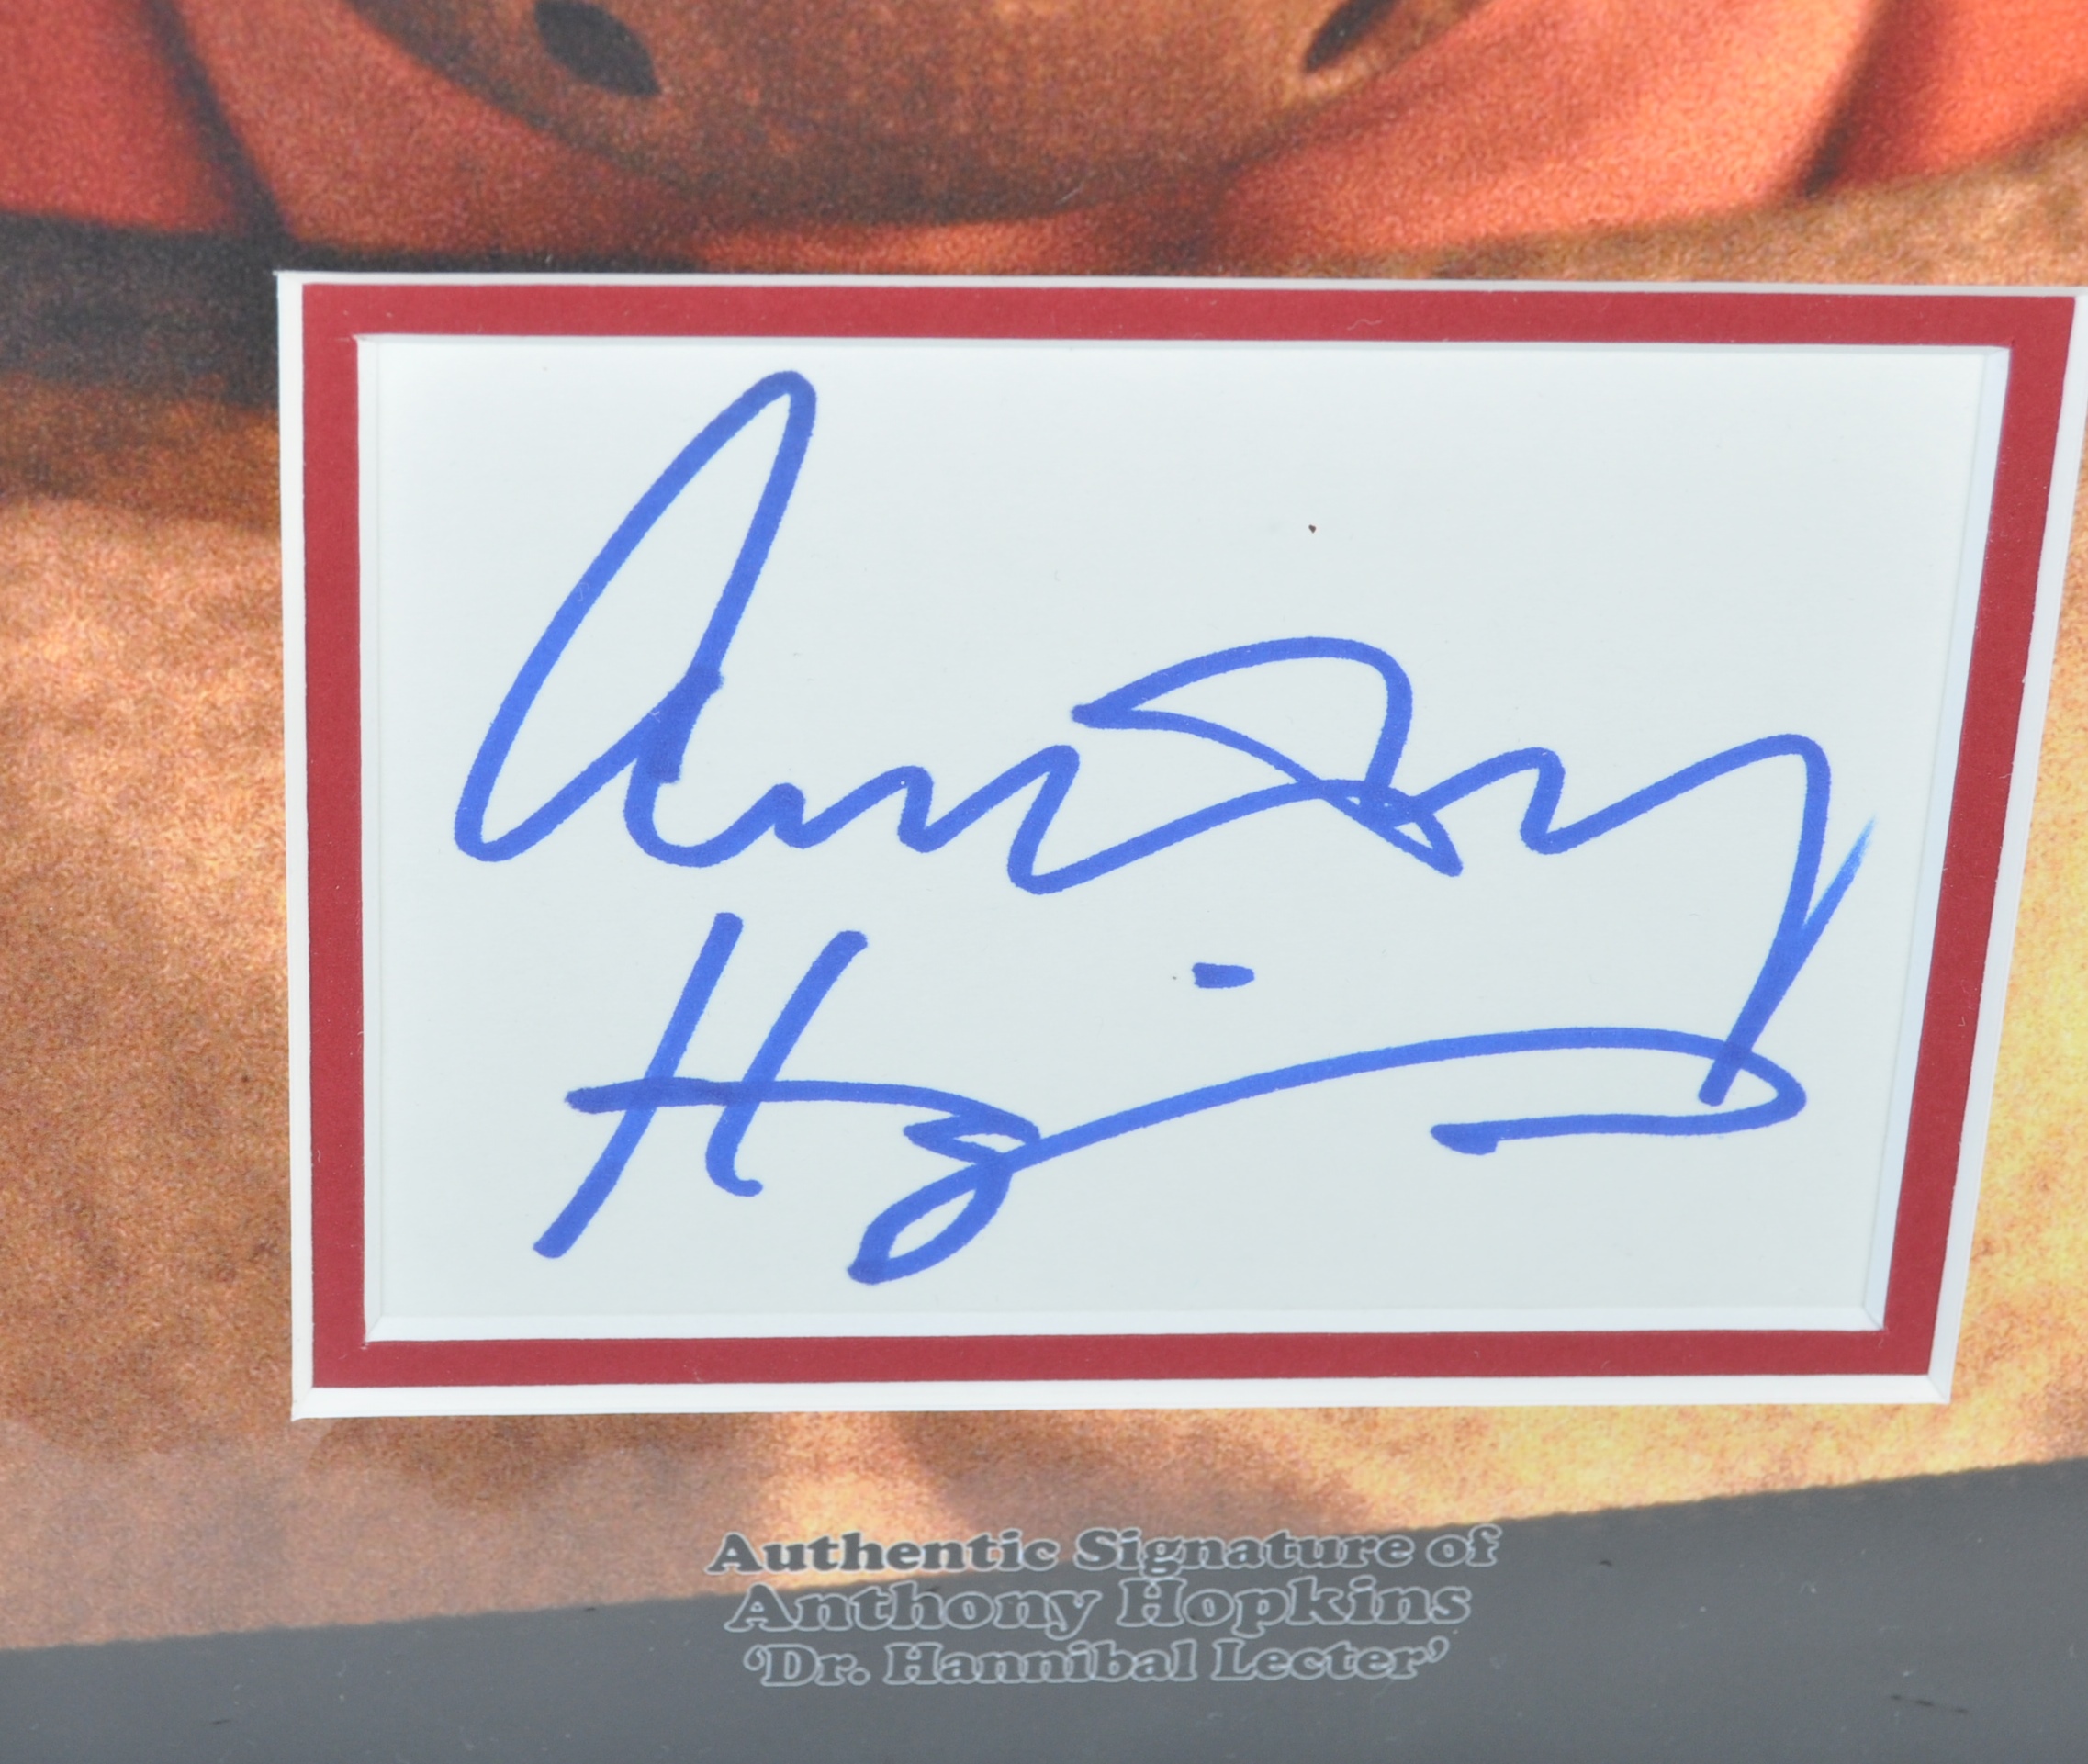 ANTHONY HOPKINS - SILENCE OF THE LAMBS - IMPRESSIVE AUTOGRAPH - Image 2 of 2